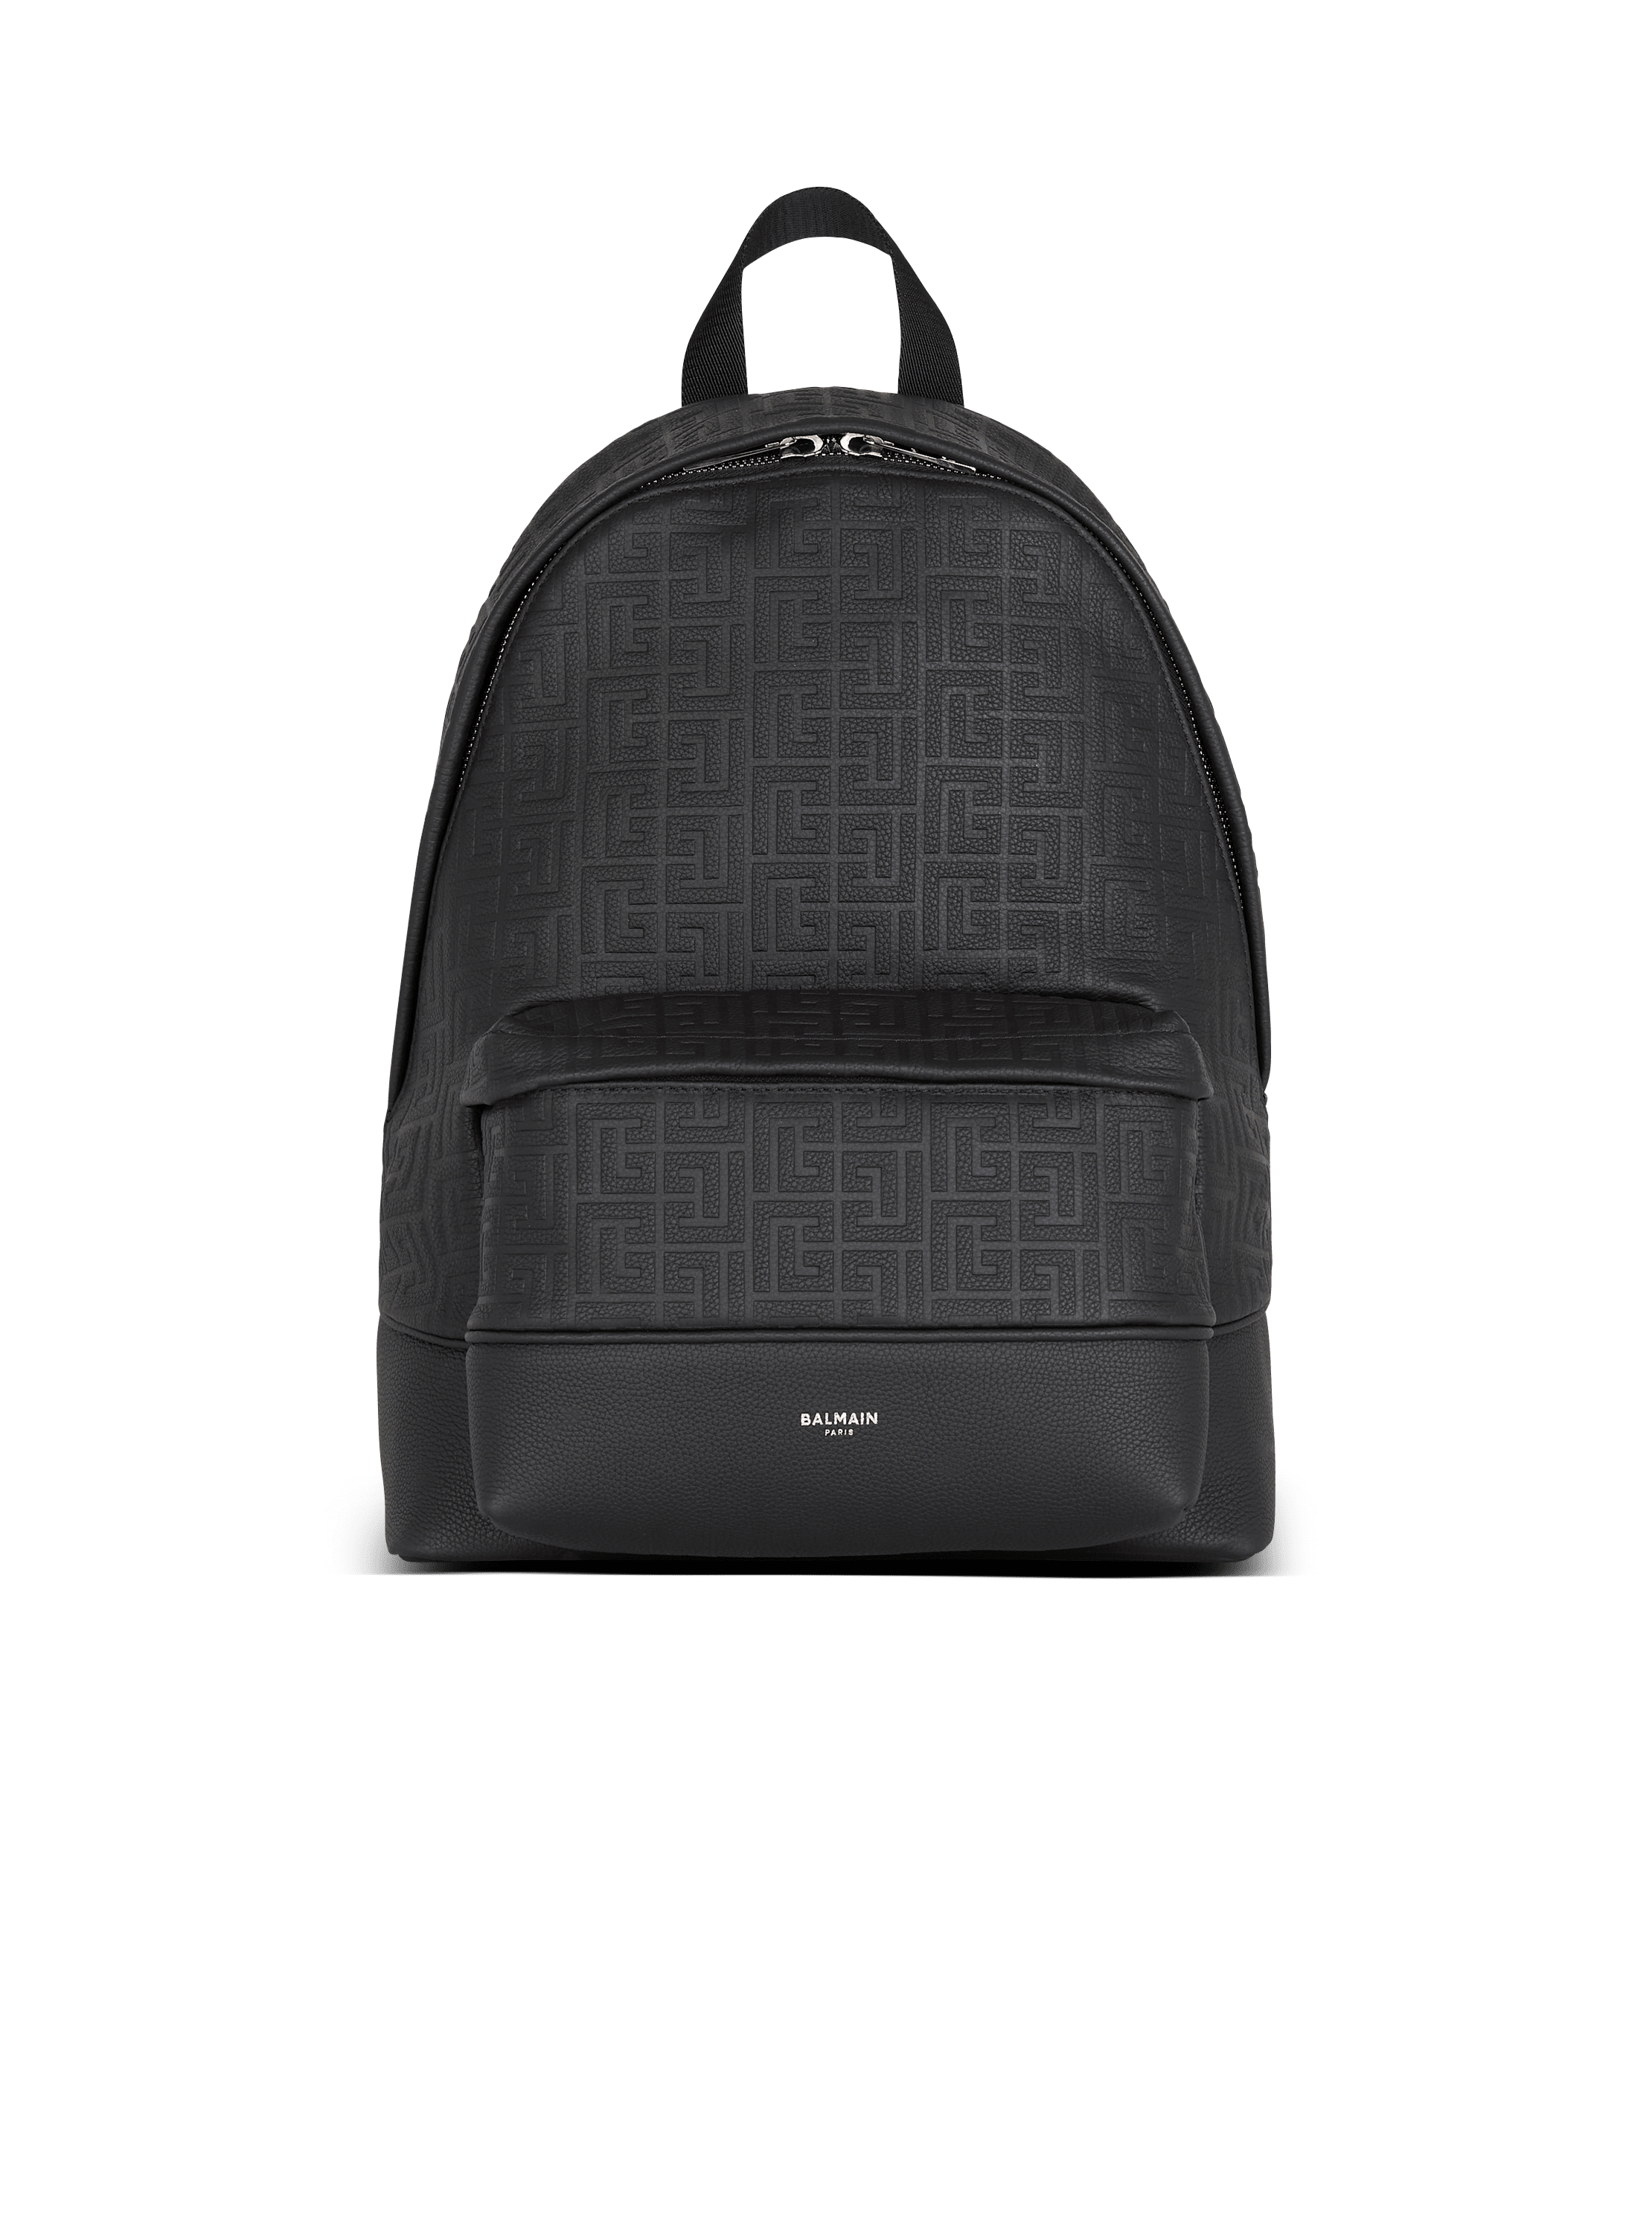 Grained leather backpack